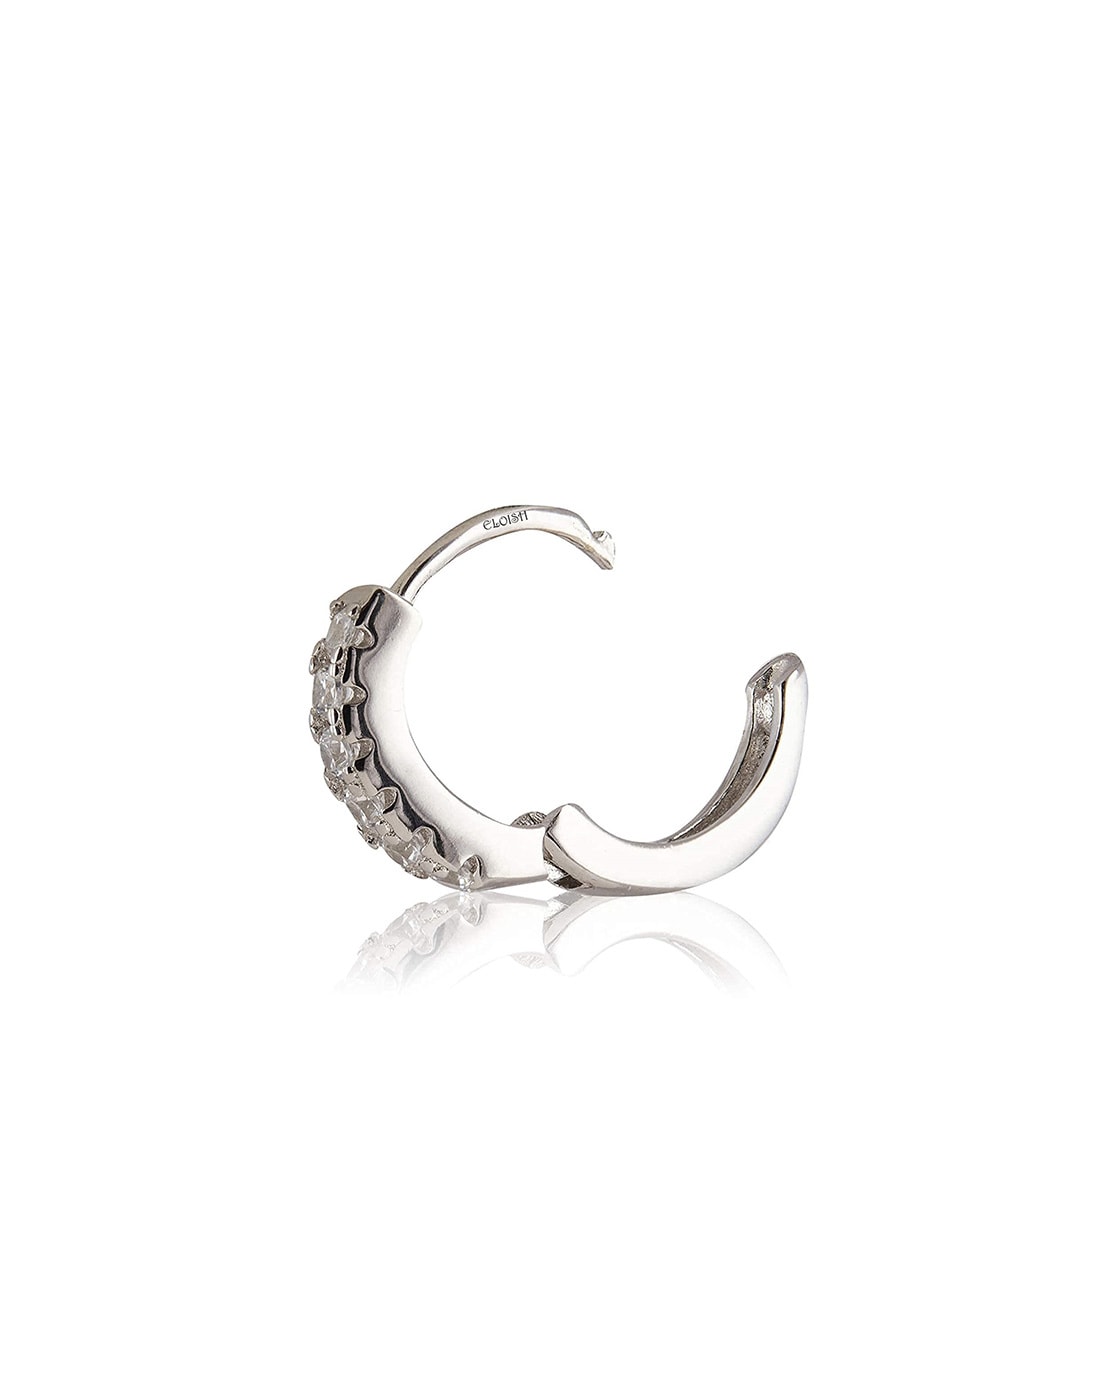 Monkey Sterling Silver Septum Nose Pin